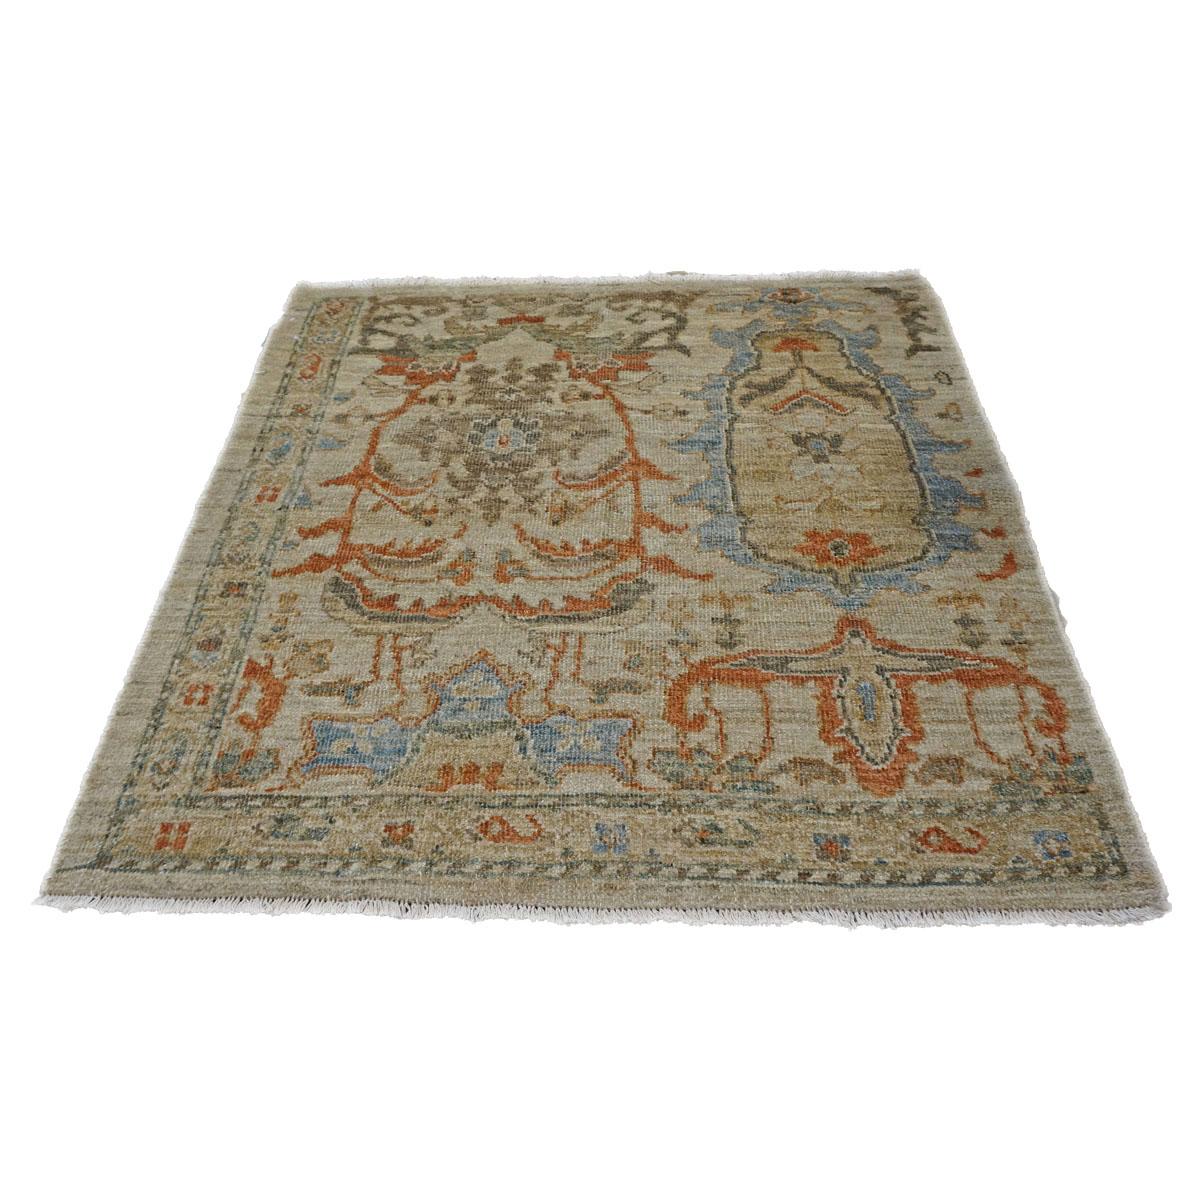 Ashly fine Rugs presents an antique recreation of an original Persian Sultanabad 3x3 Ivory, Rust, & Blue Handmade Area Rug. Part of our own previous production, this antique recreation was thought of and created in-house and 100% handmade in Iran by